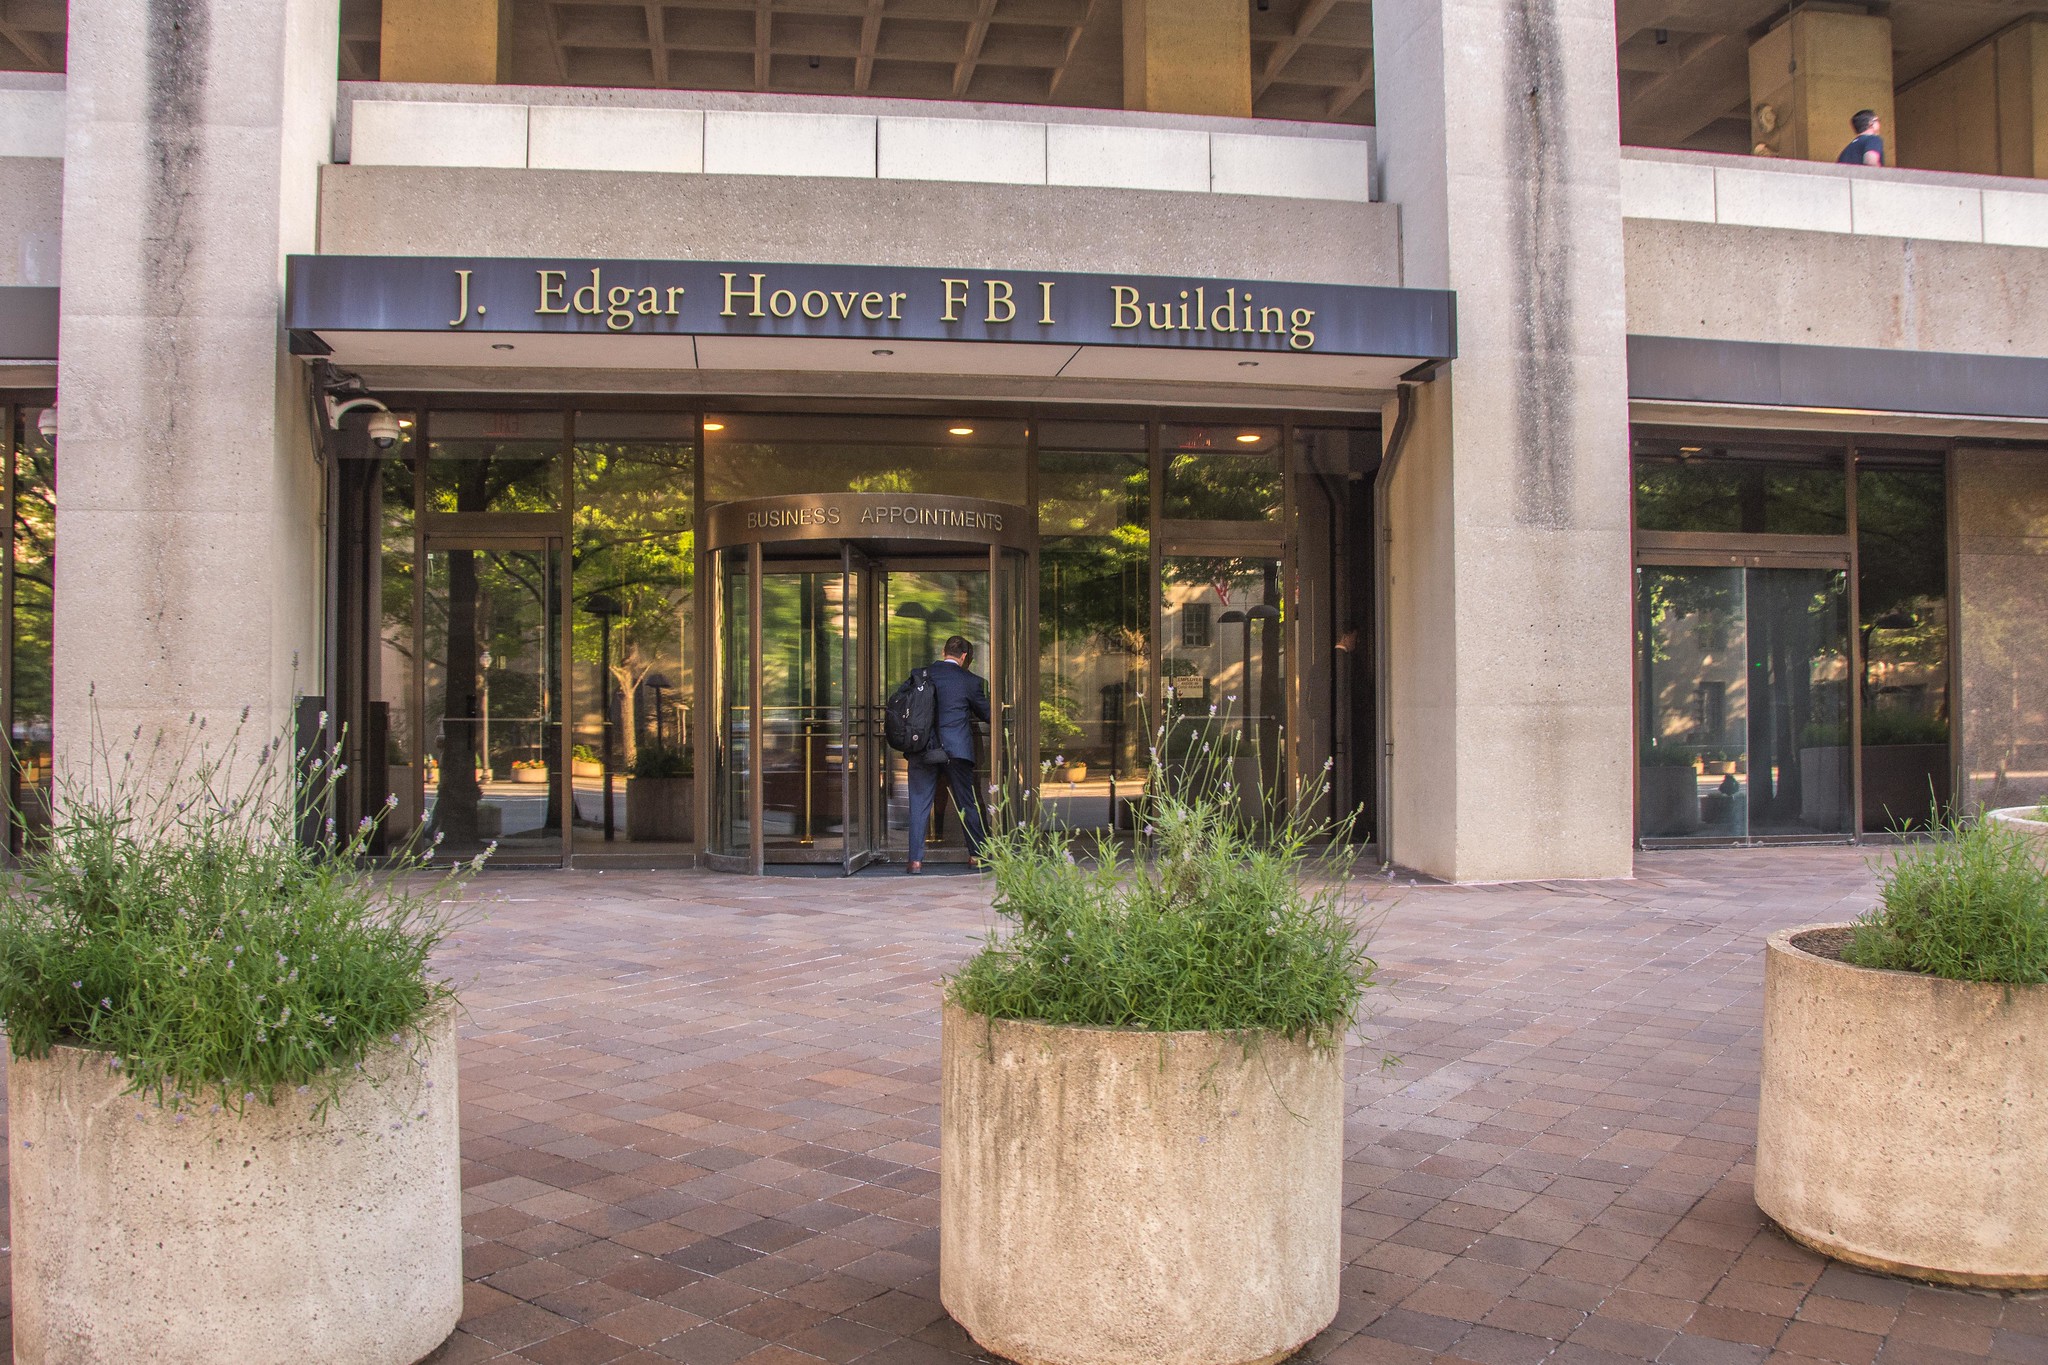 Photo of entrance to FBI building in Washington, D.C.